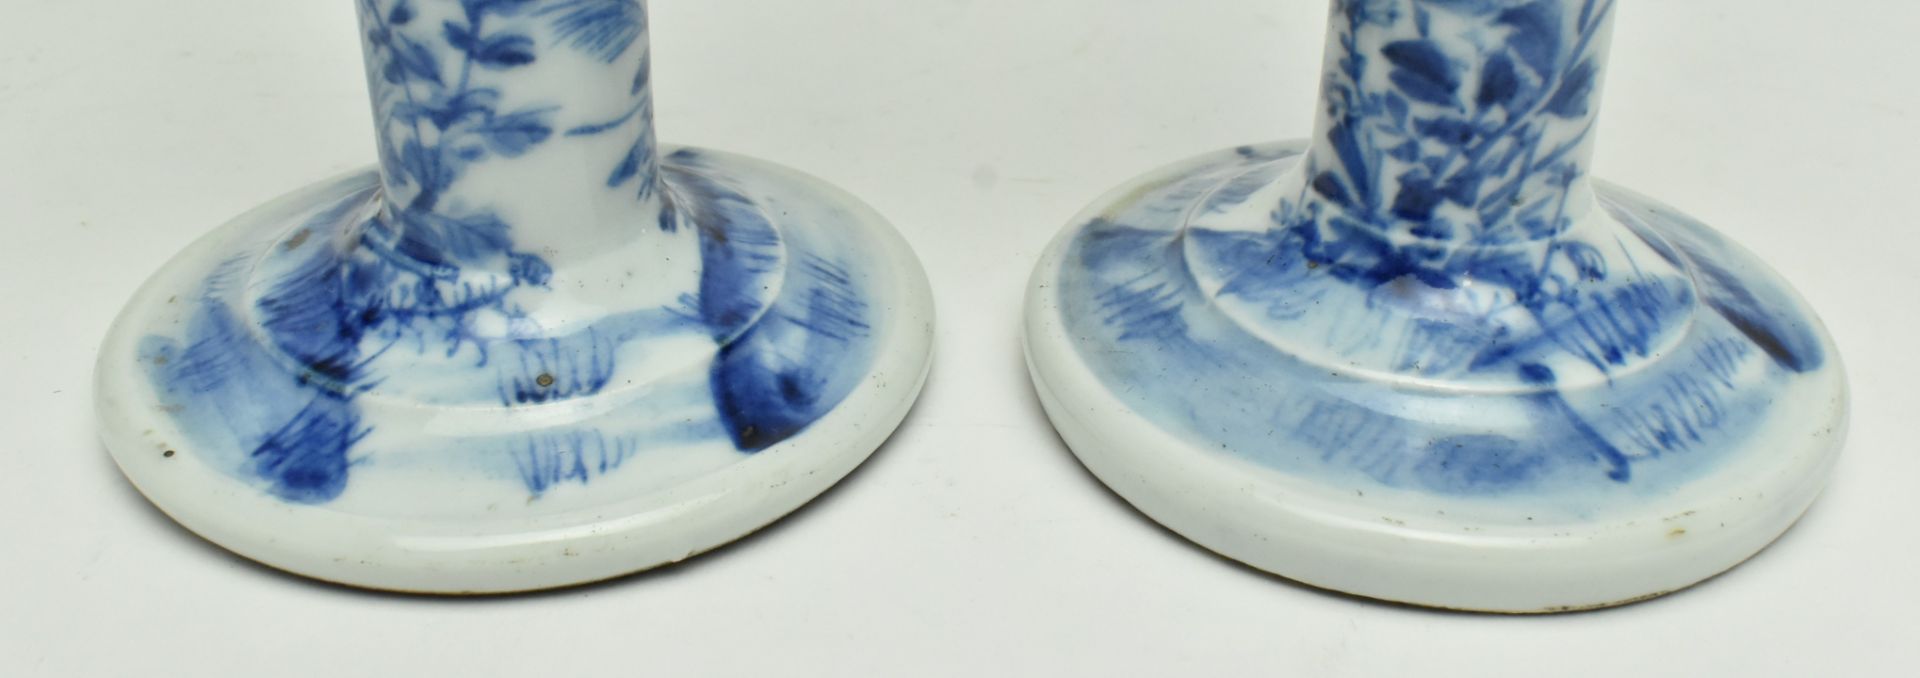 PAIR OF REPUBLIC BLUE AND WHITE CANDLE STICKS 民国青花烛台一对 - Image 6 of 7